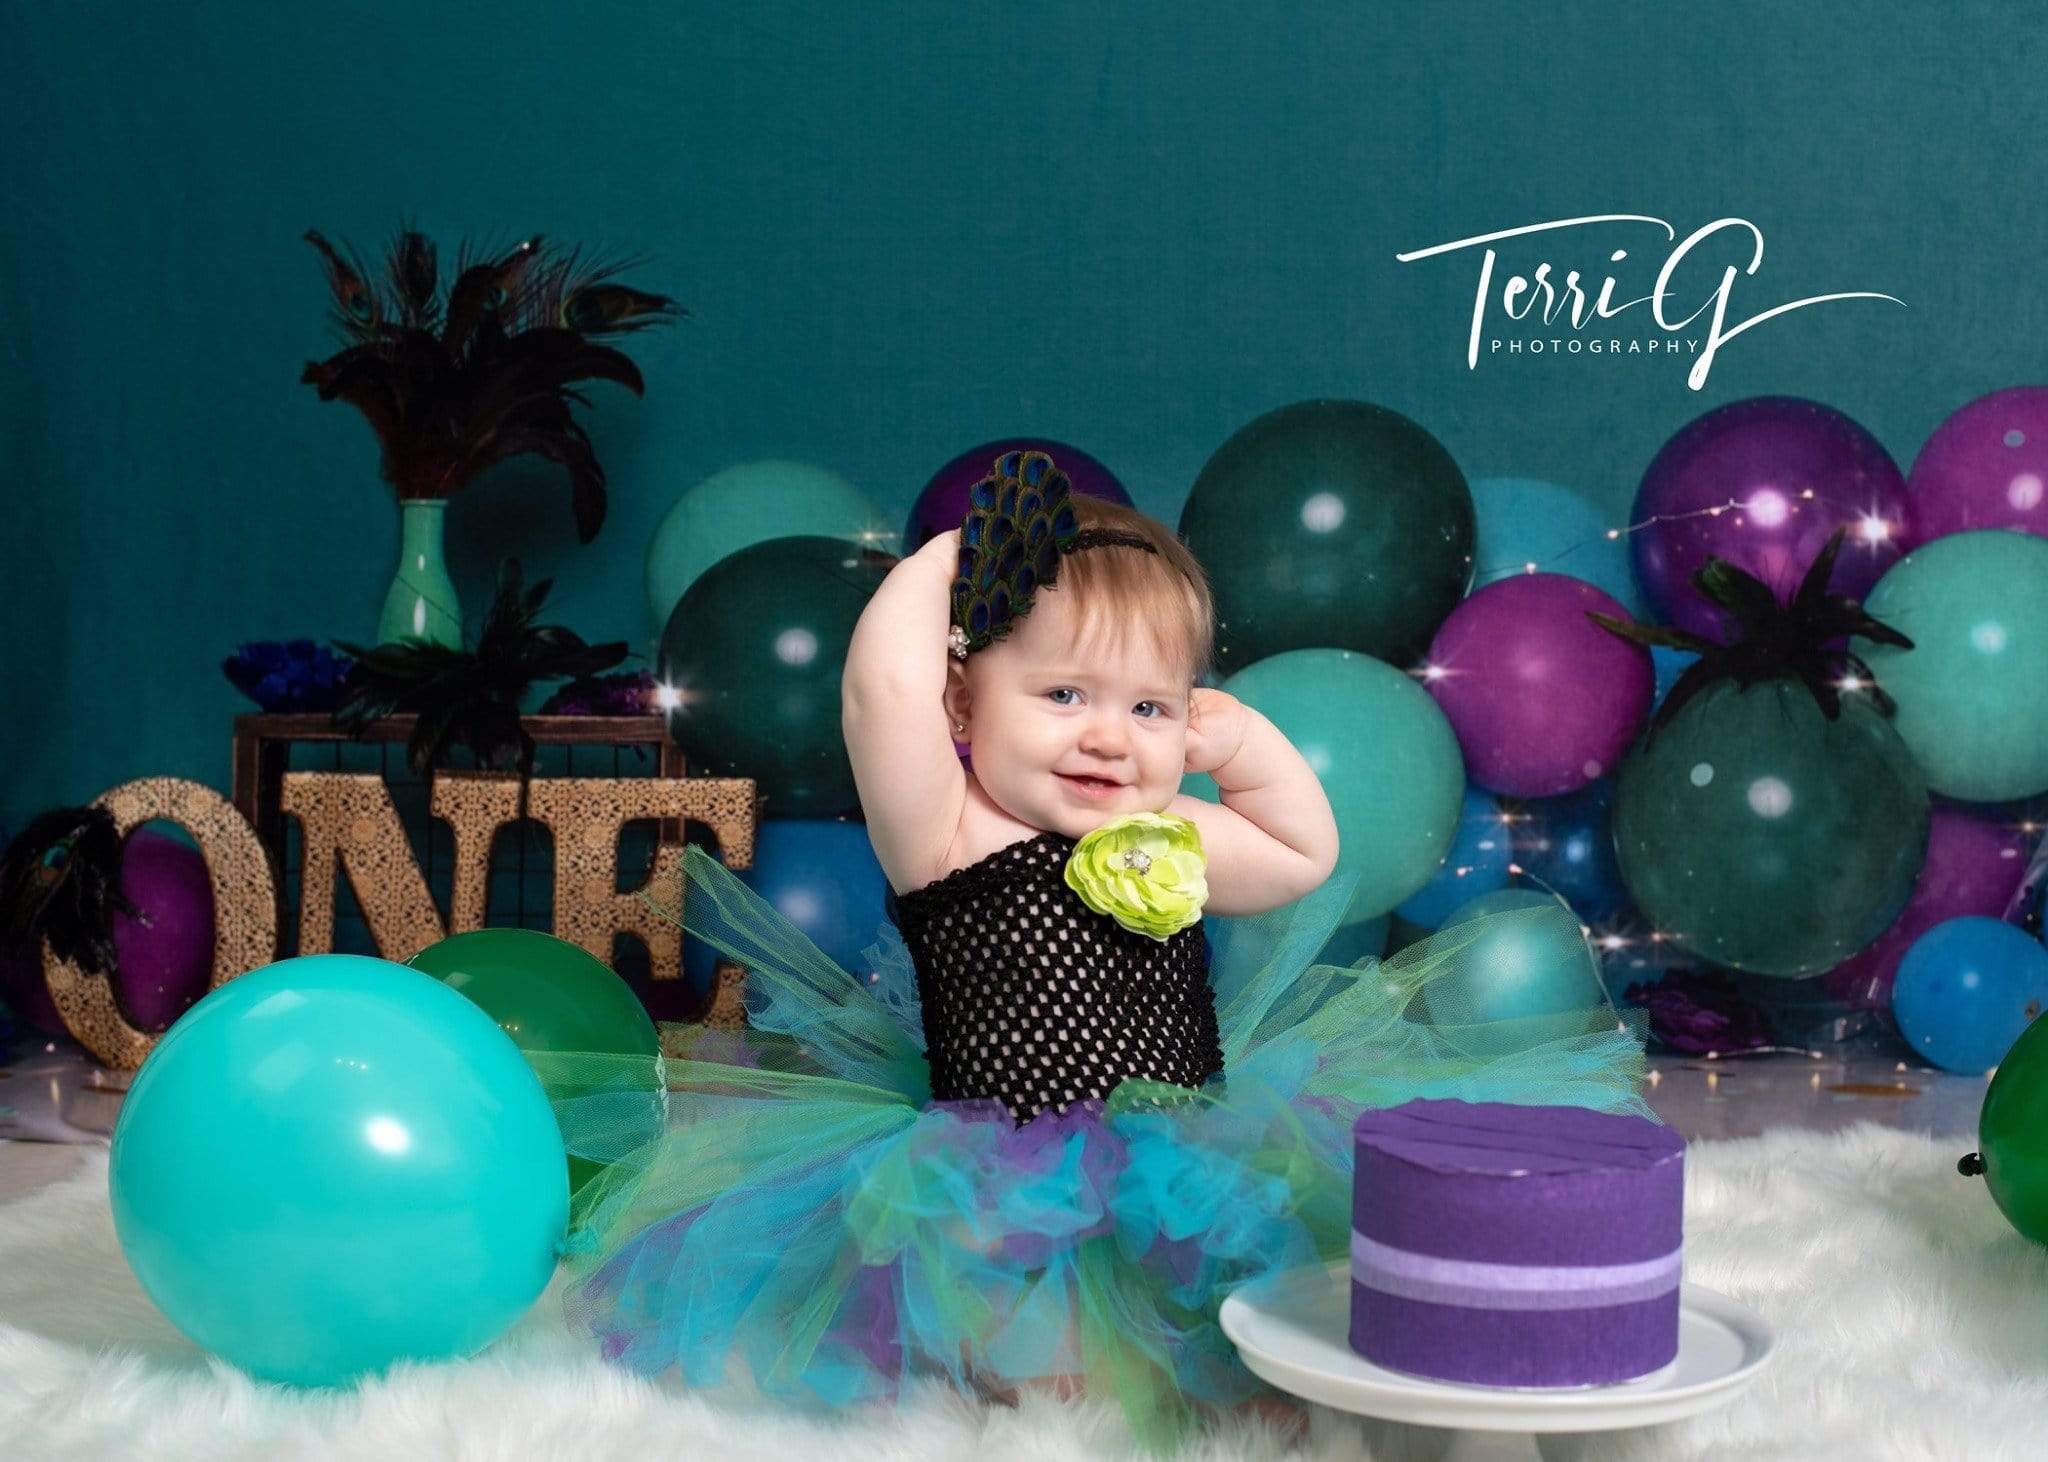 Katebackdrop£ºKate 1st Birthday with Balloons Backdrop for Photography Designed by Cassie Christiansen Photography